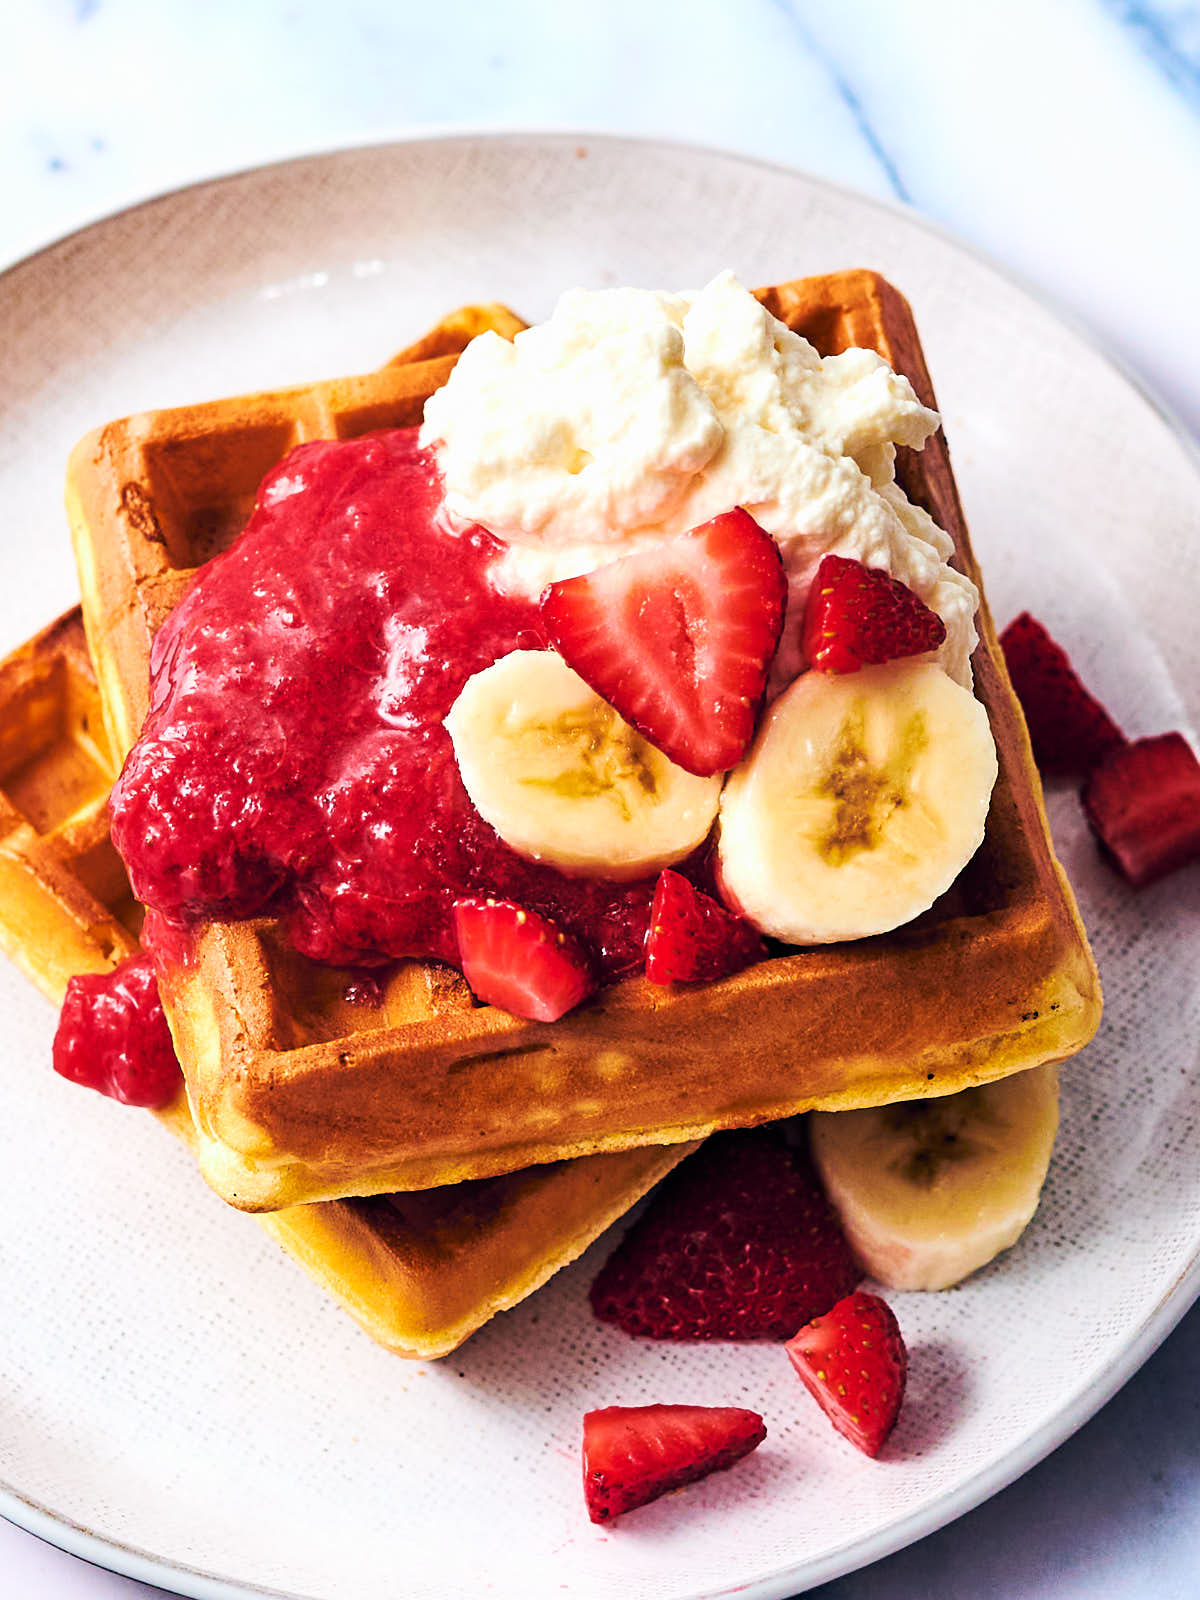 Waffles topped with strawberry rhubarb jam, bananas and whipped cream.